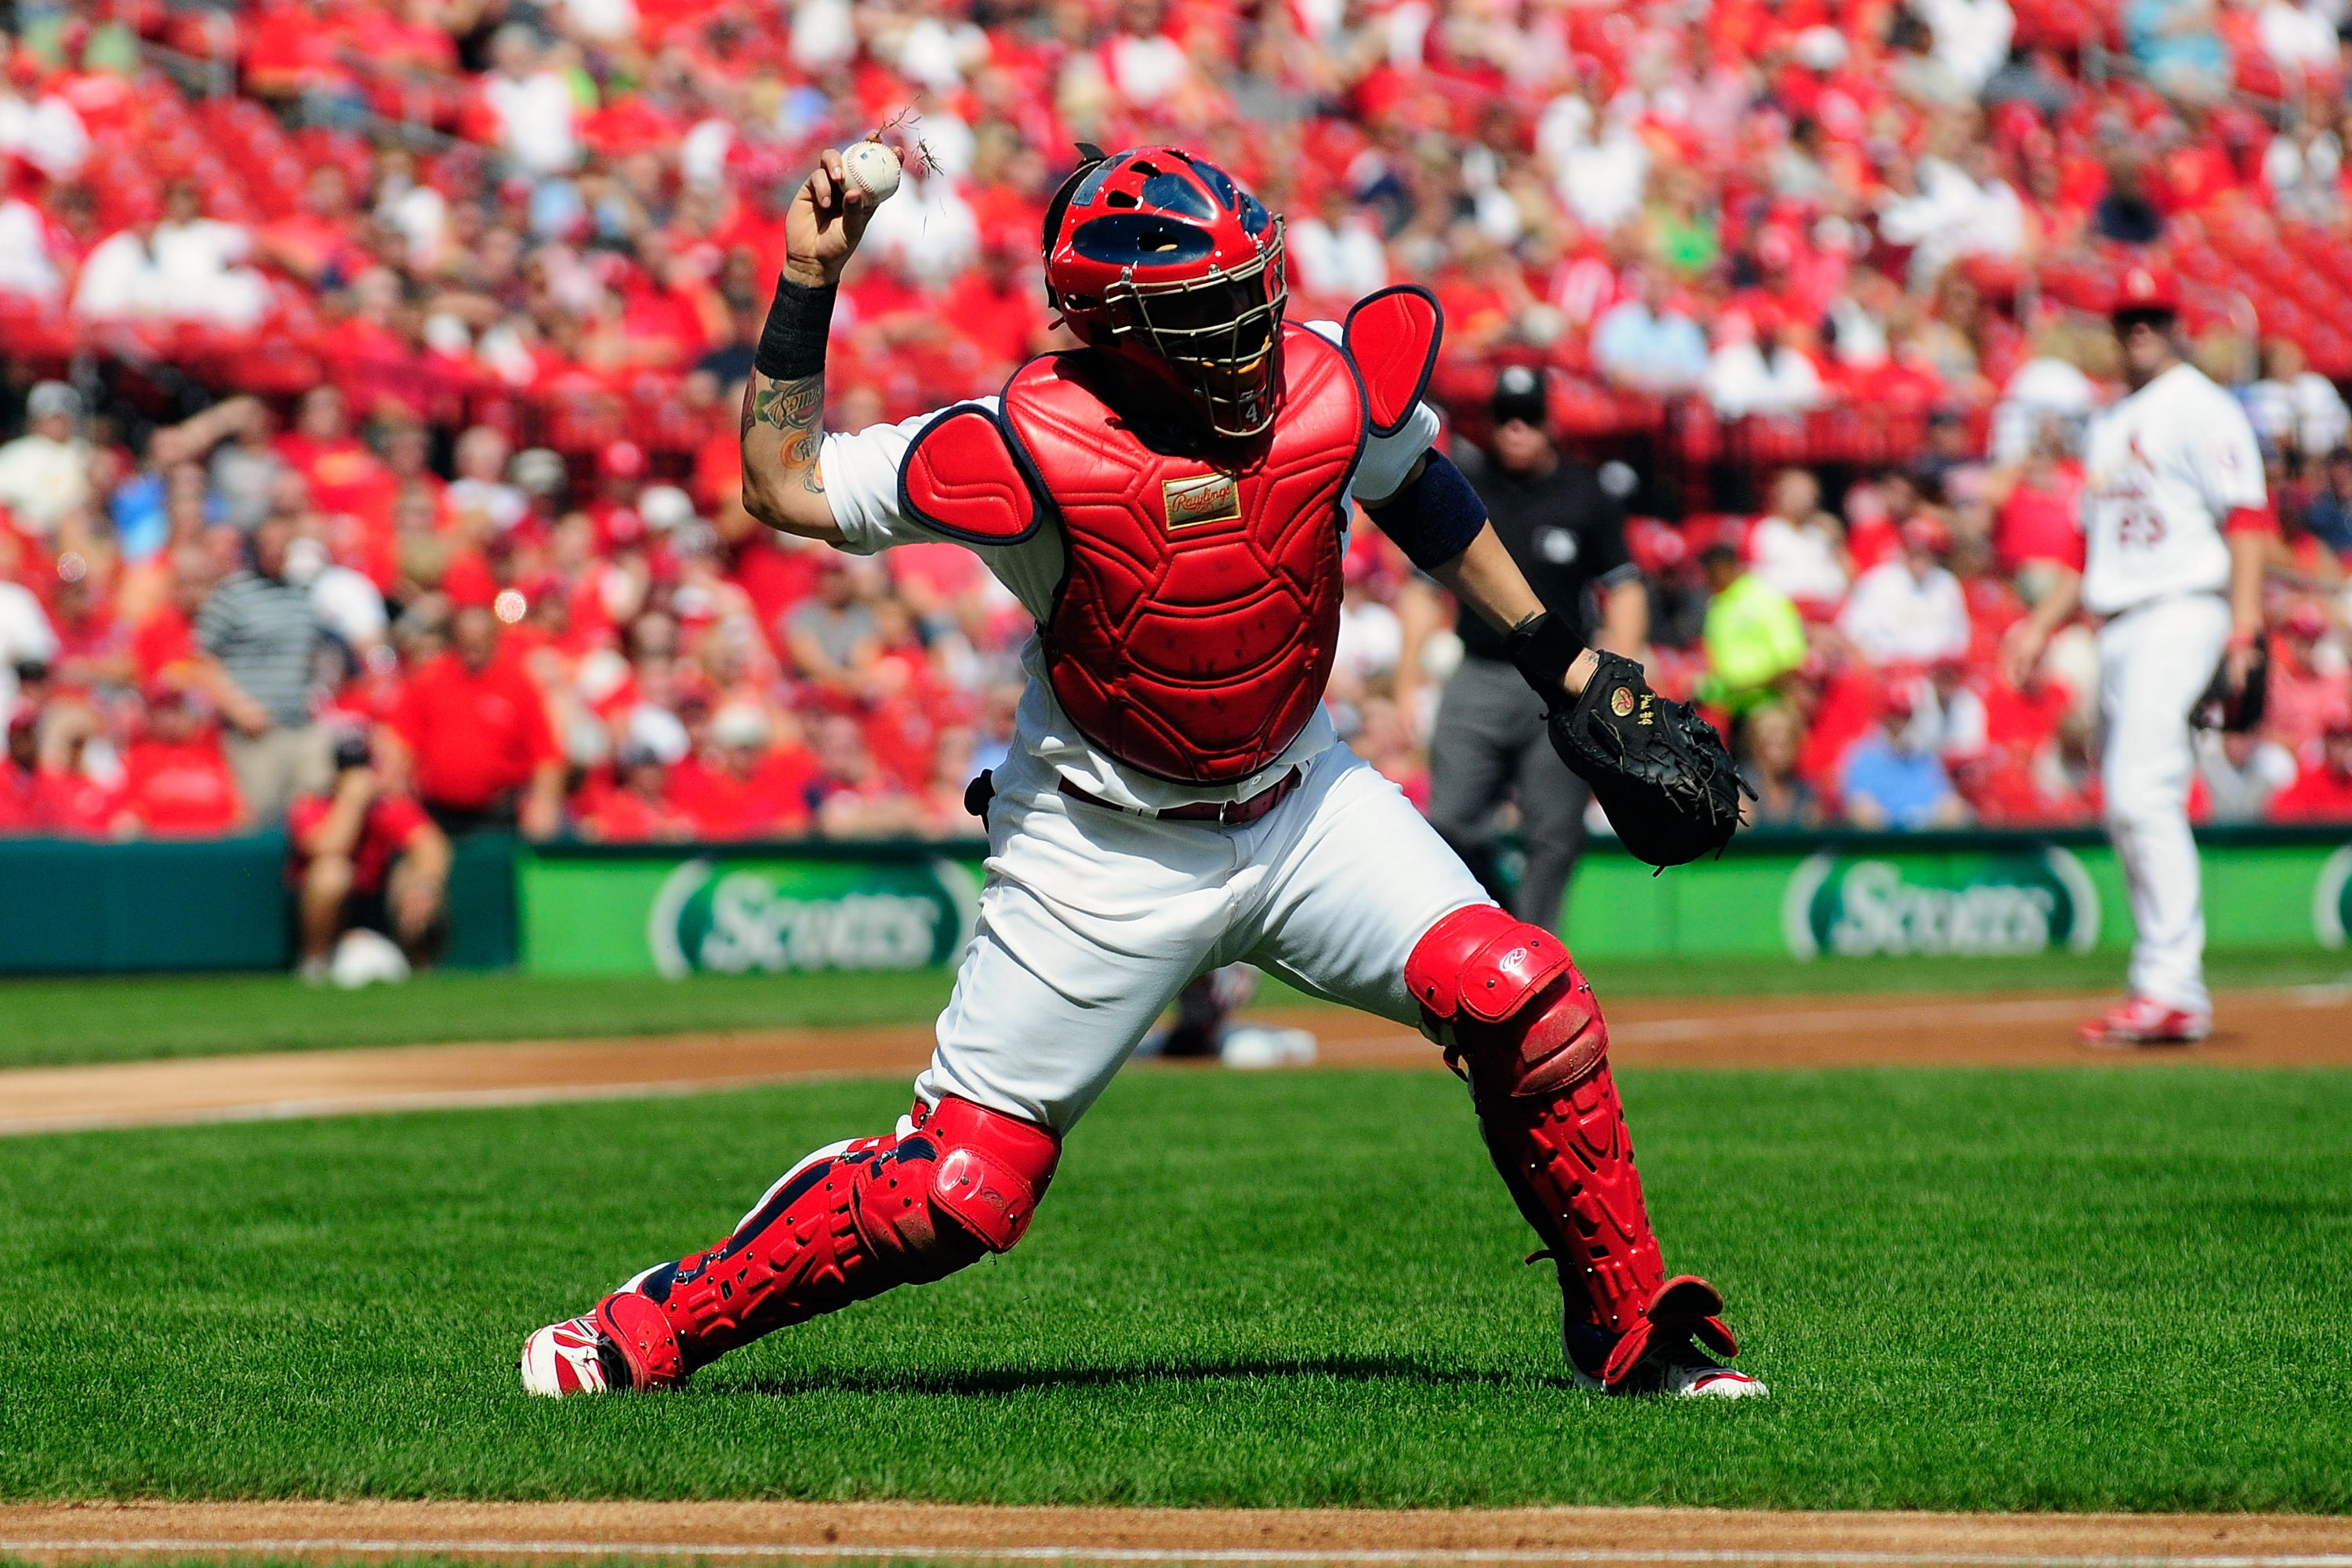 Download Yadier Molina of the St. Louis Cardinals delivers a pitch